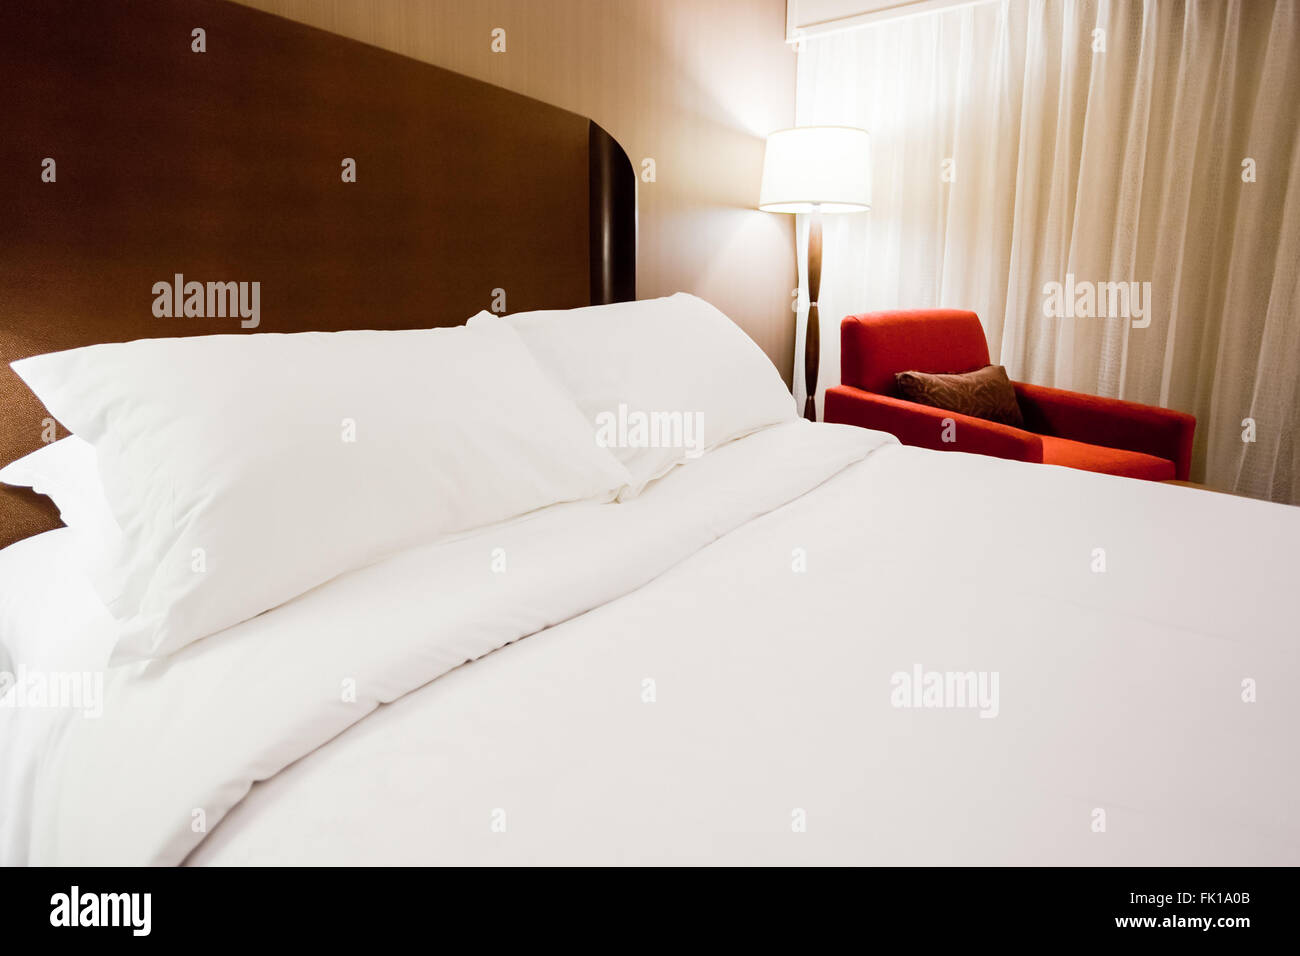 Modern hotel room with a bed, lamp and red chair Stock Photo